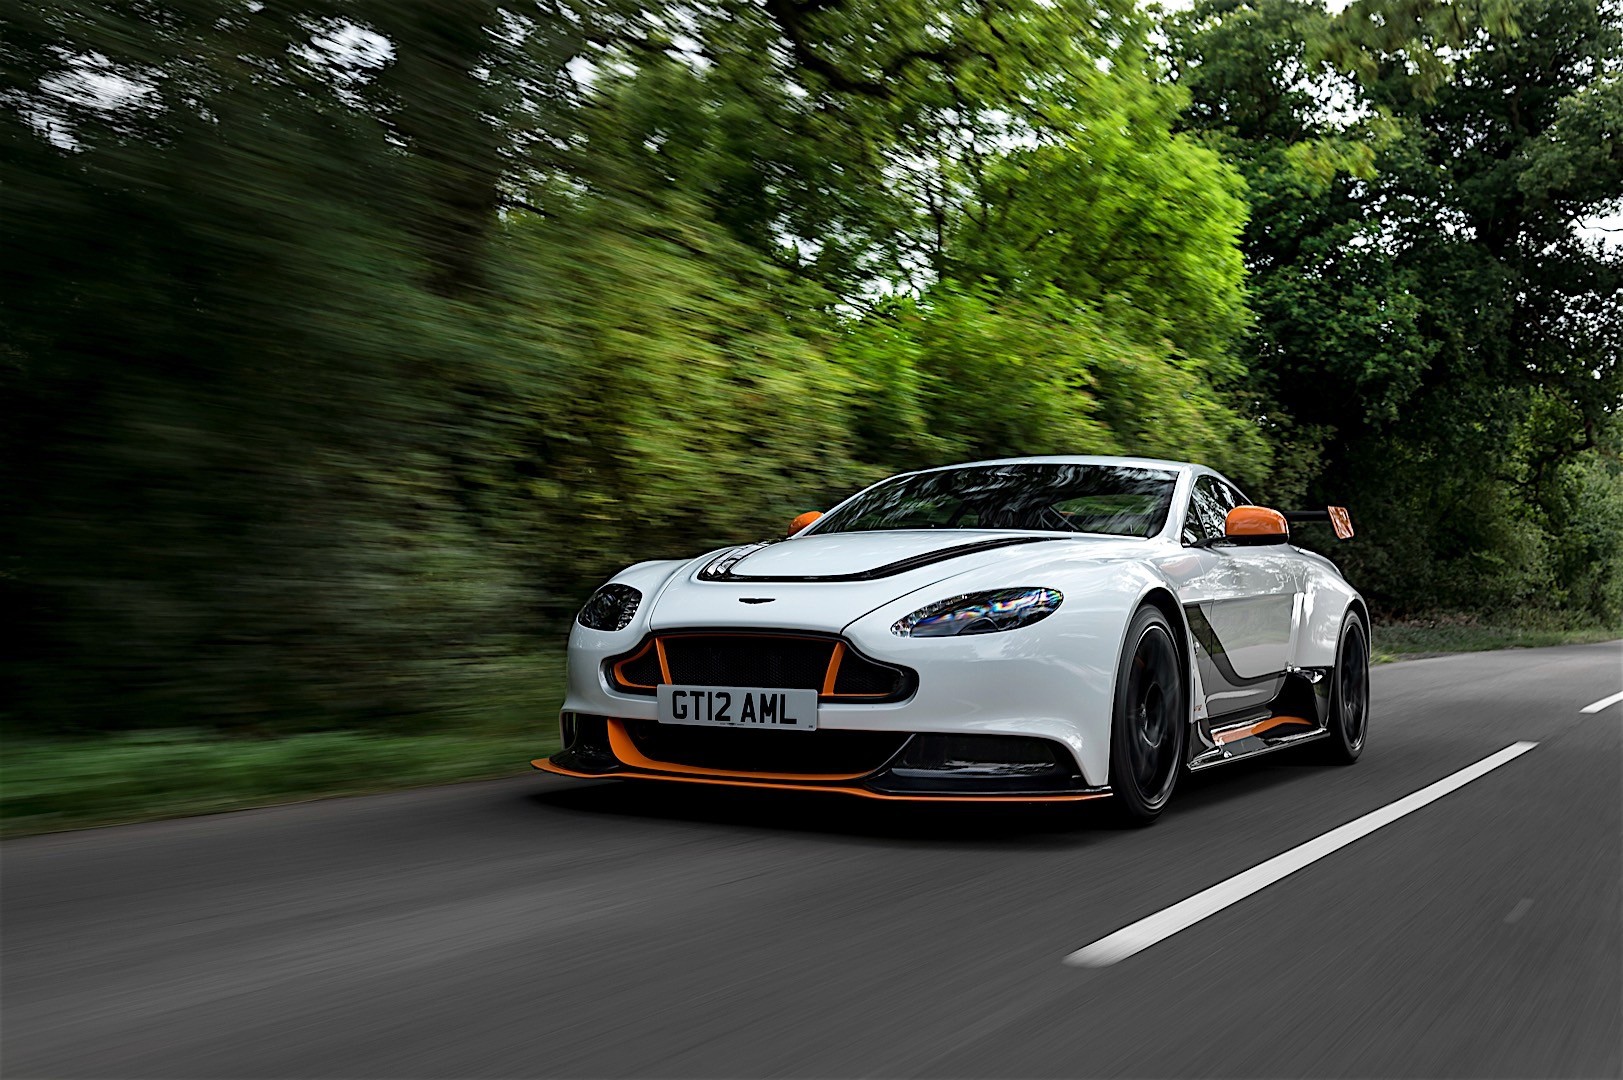 The Ultimate Driving Machine: The 2016 Aston Martin Vantage GT12 Roadster